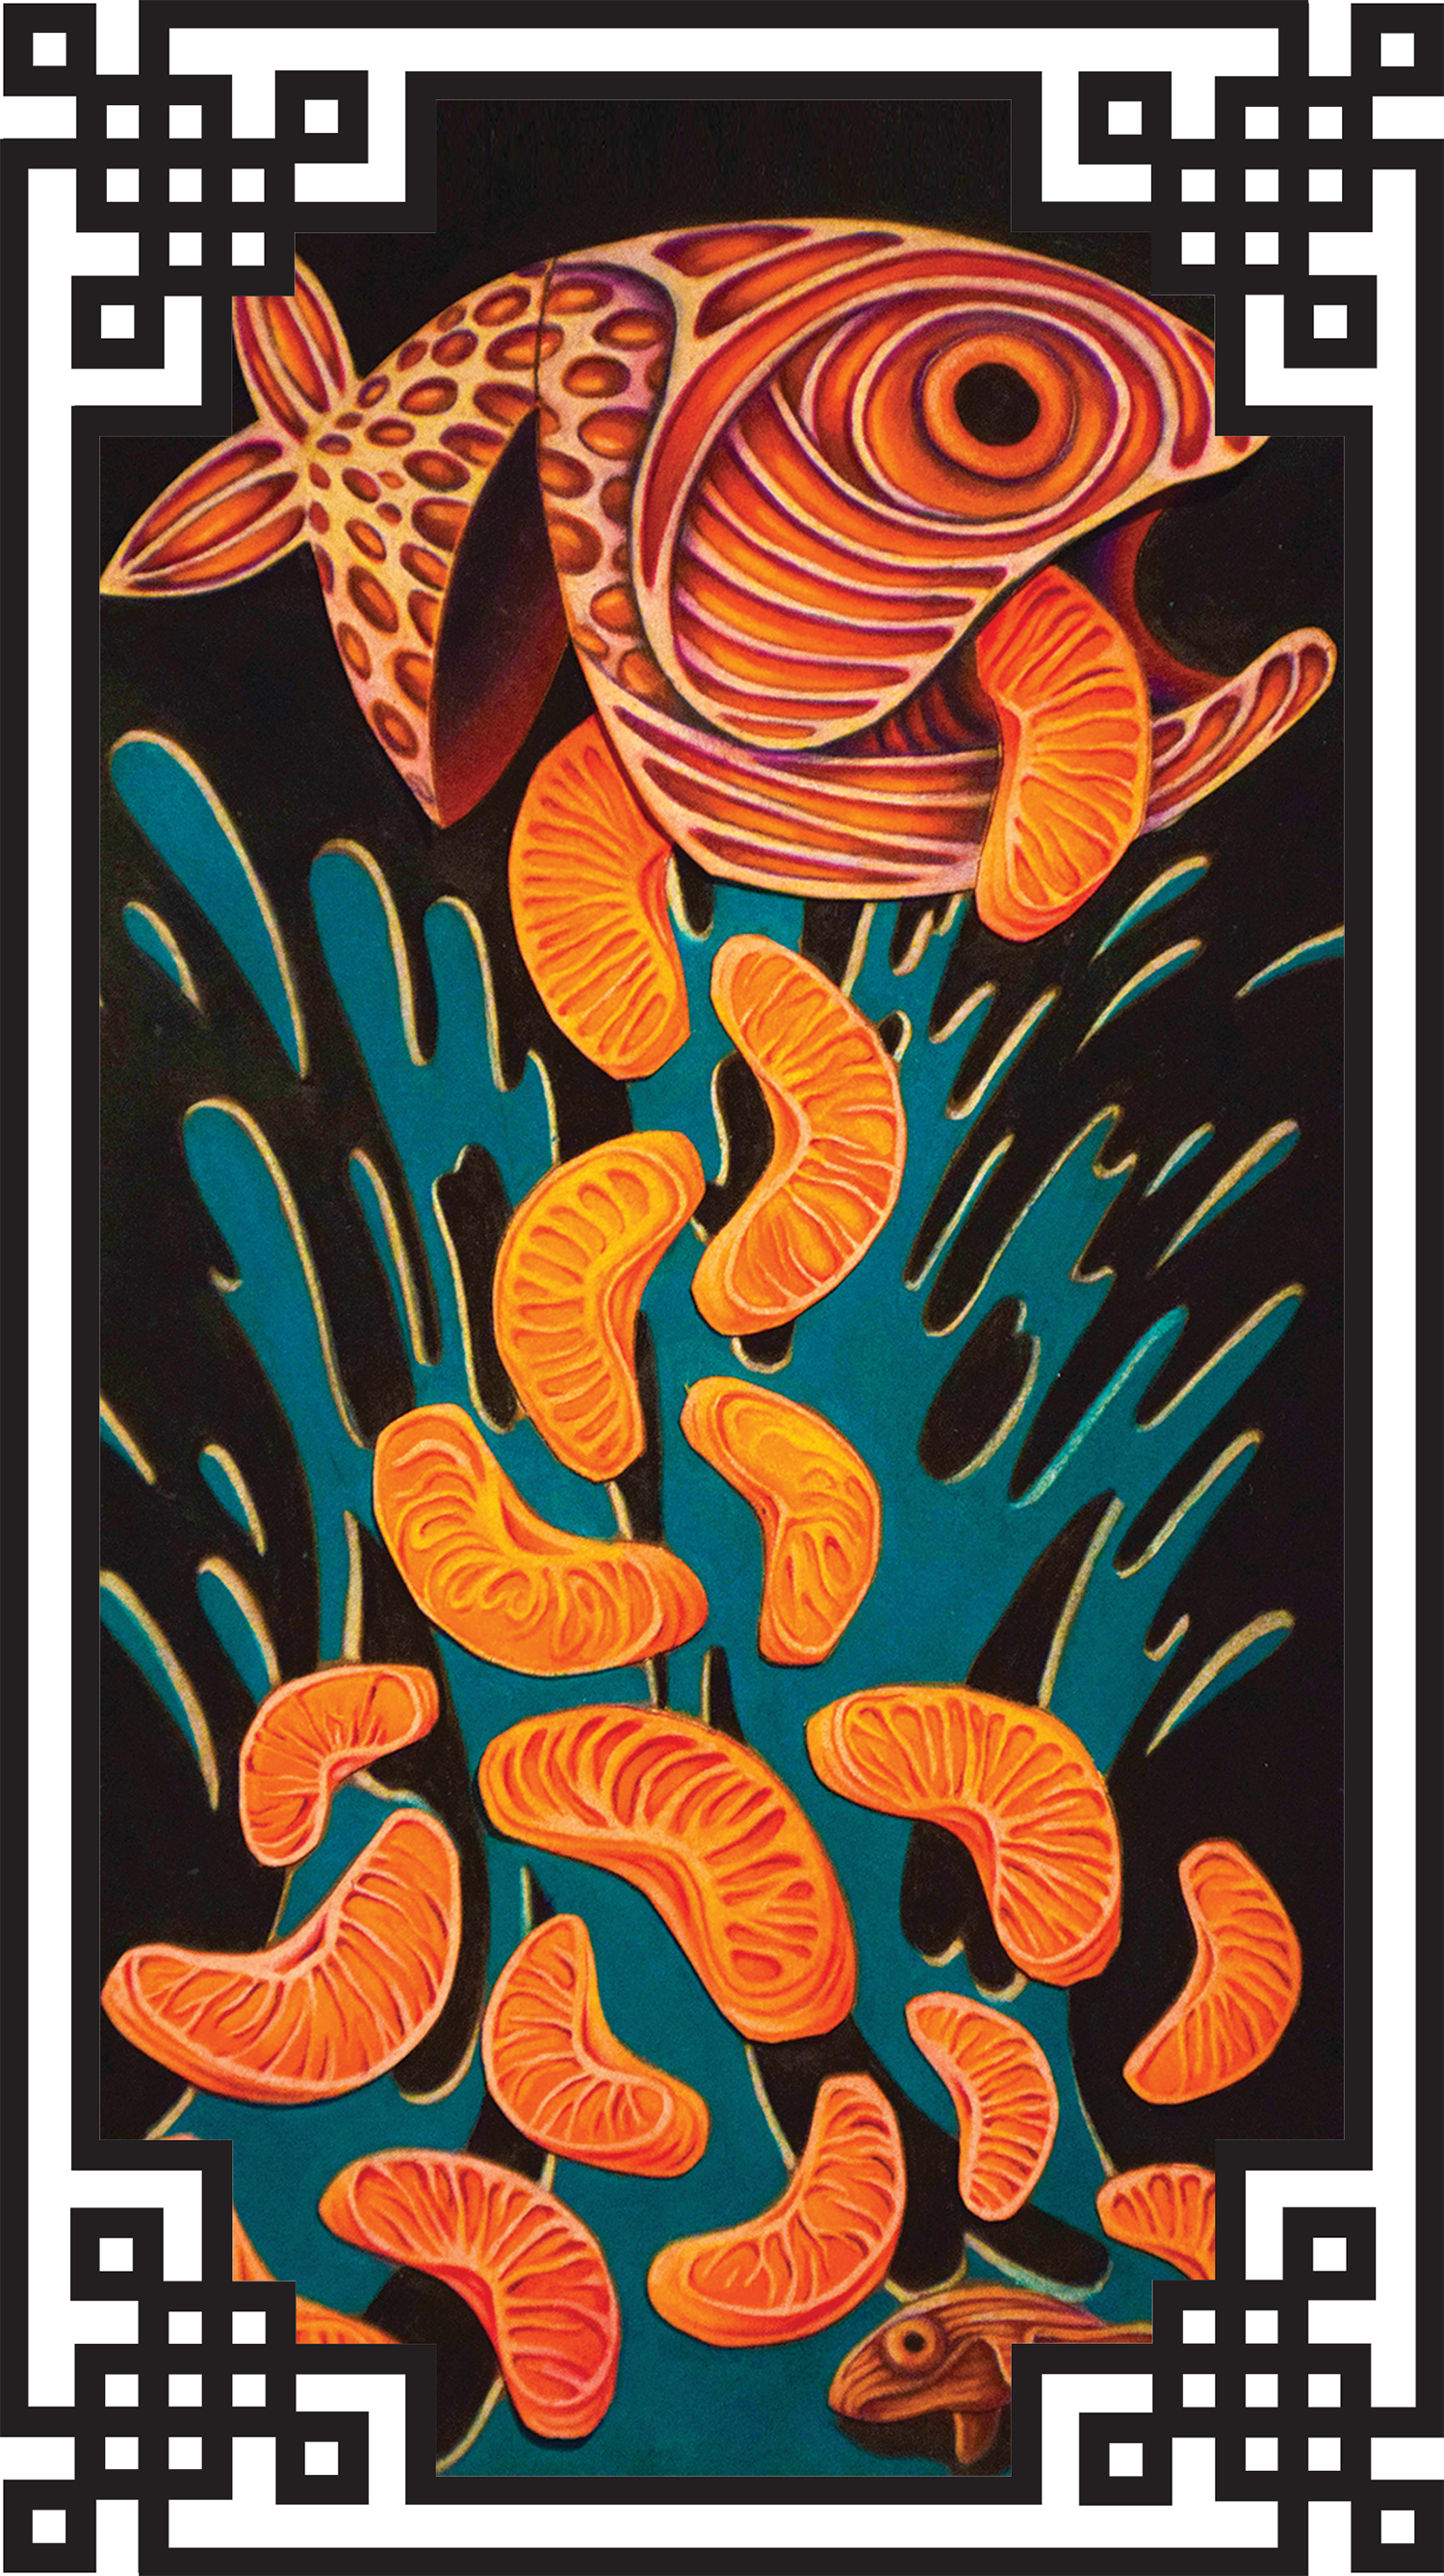 Vertical Yue Moon artwork of paper cut art featuring a detailed drawing of a fish and mandarin oranges, it has a black & blue background with a traditional Chinese black & white border around it.